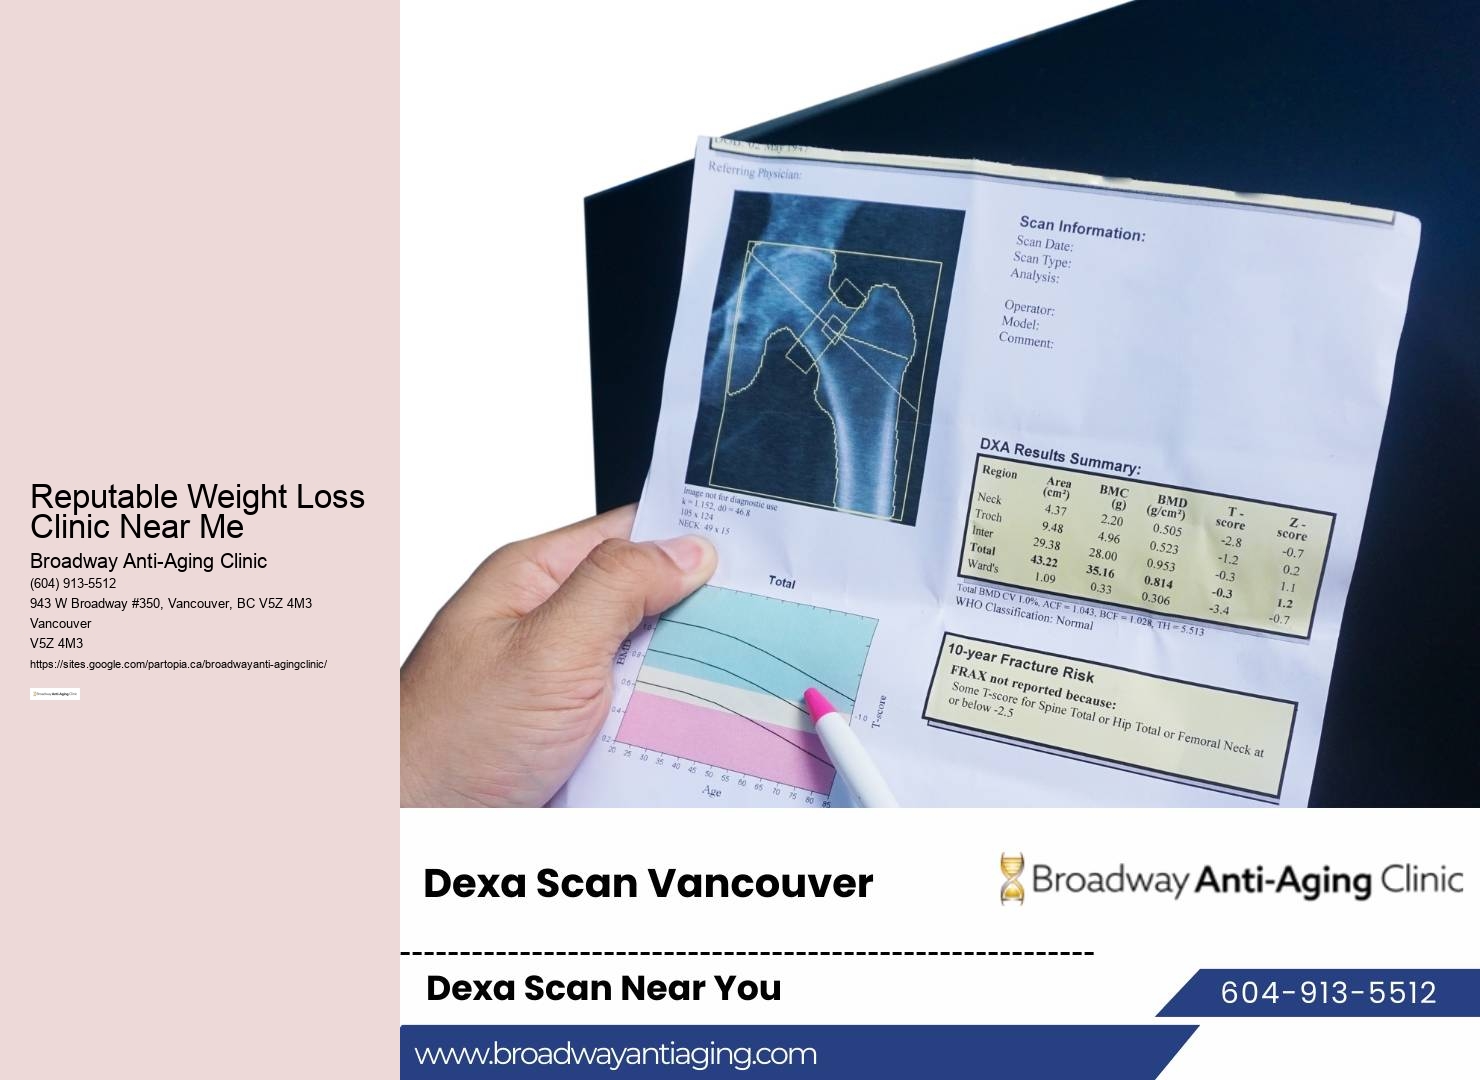 Vancouver Comprehensive Weight Loss Clinic